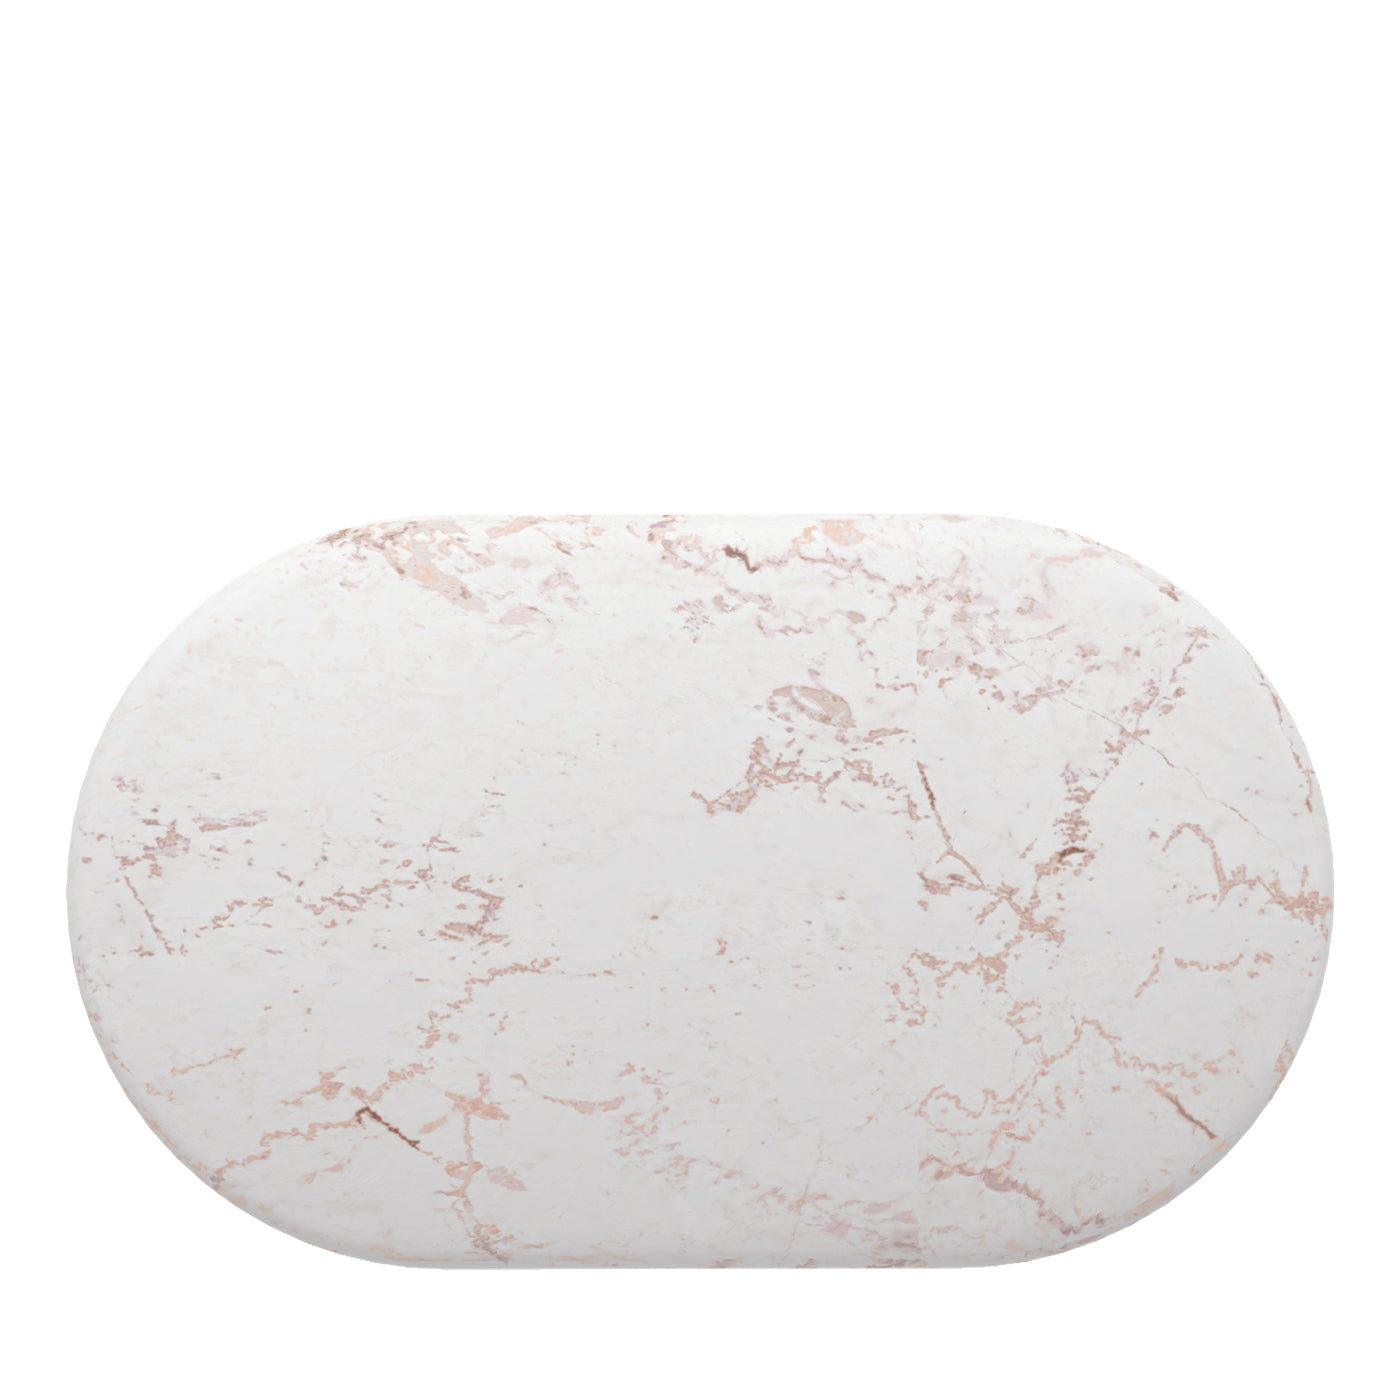 Chloe Pink Portugal Marble Coffee Table - Alternative view 2